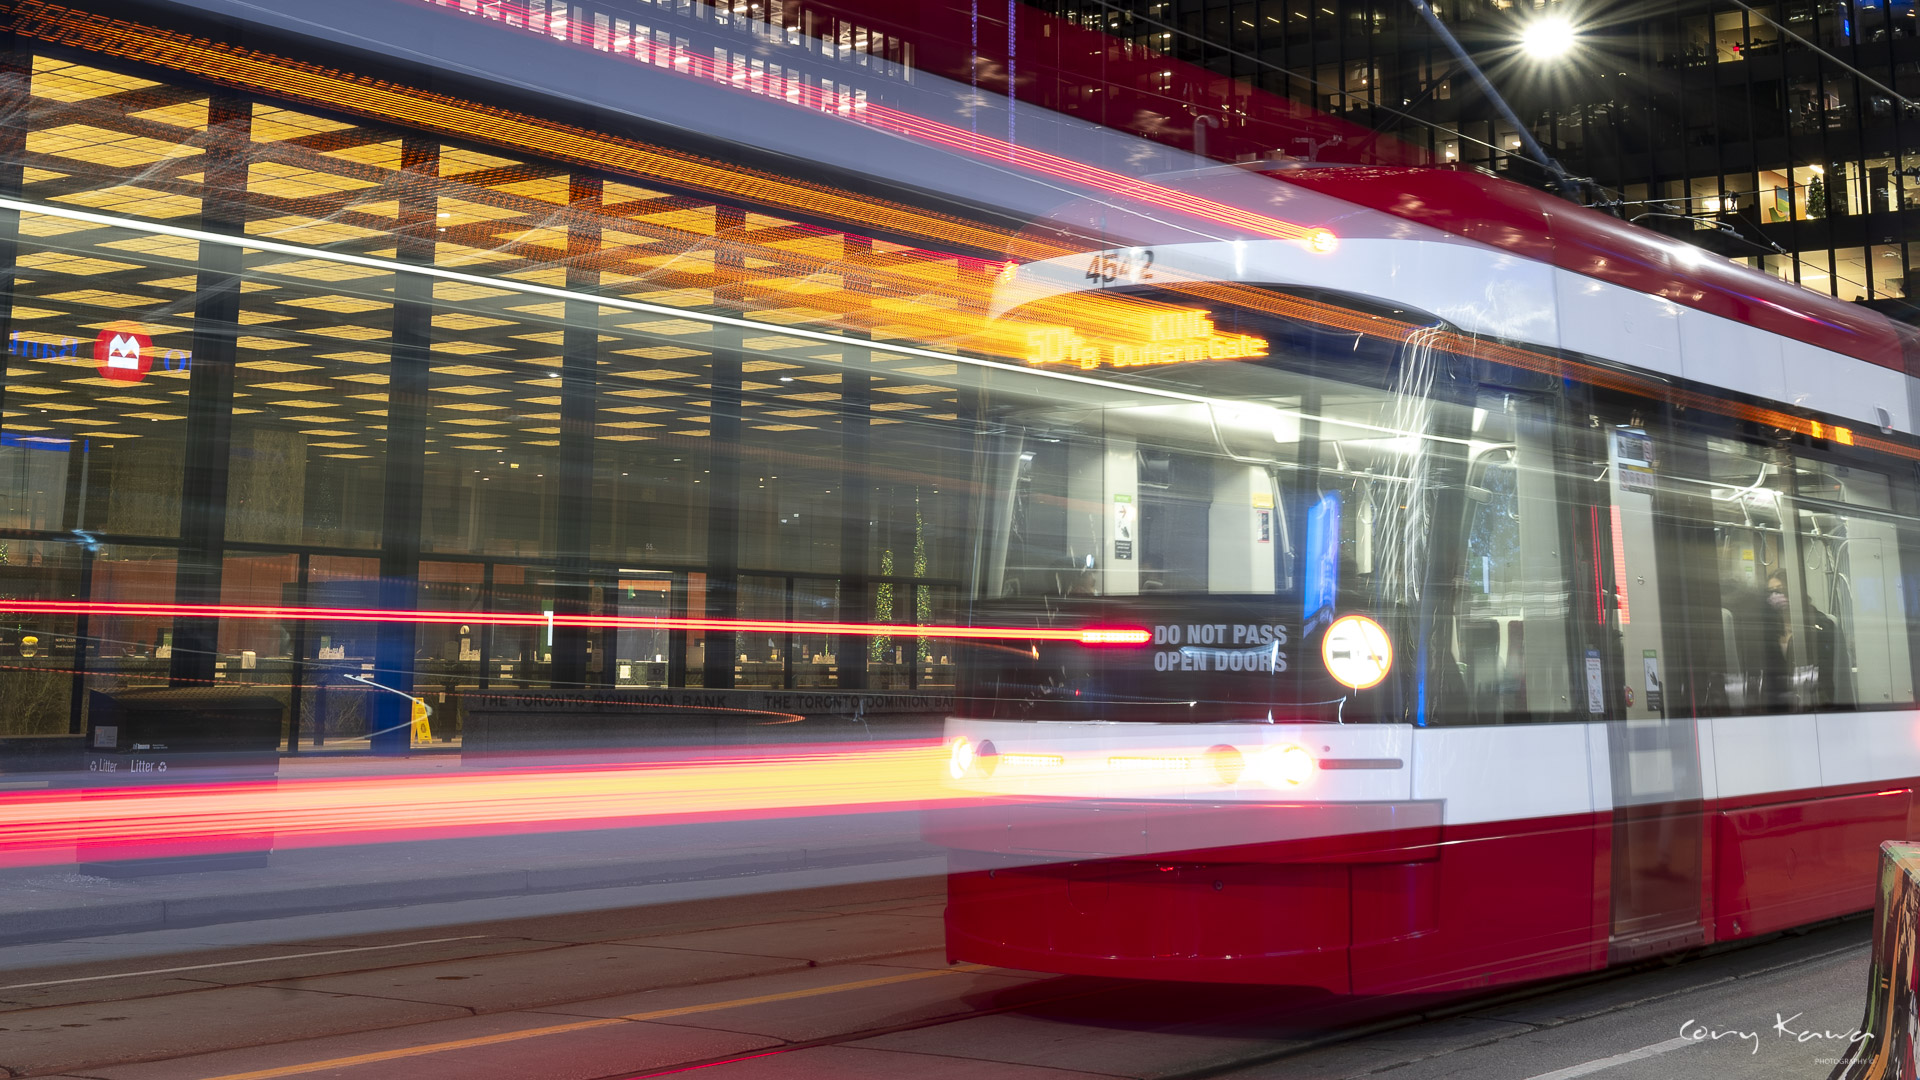 Long exposure of a TTC streetcar with light trails following behind